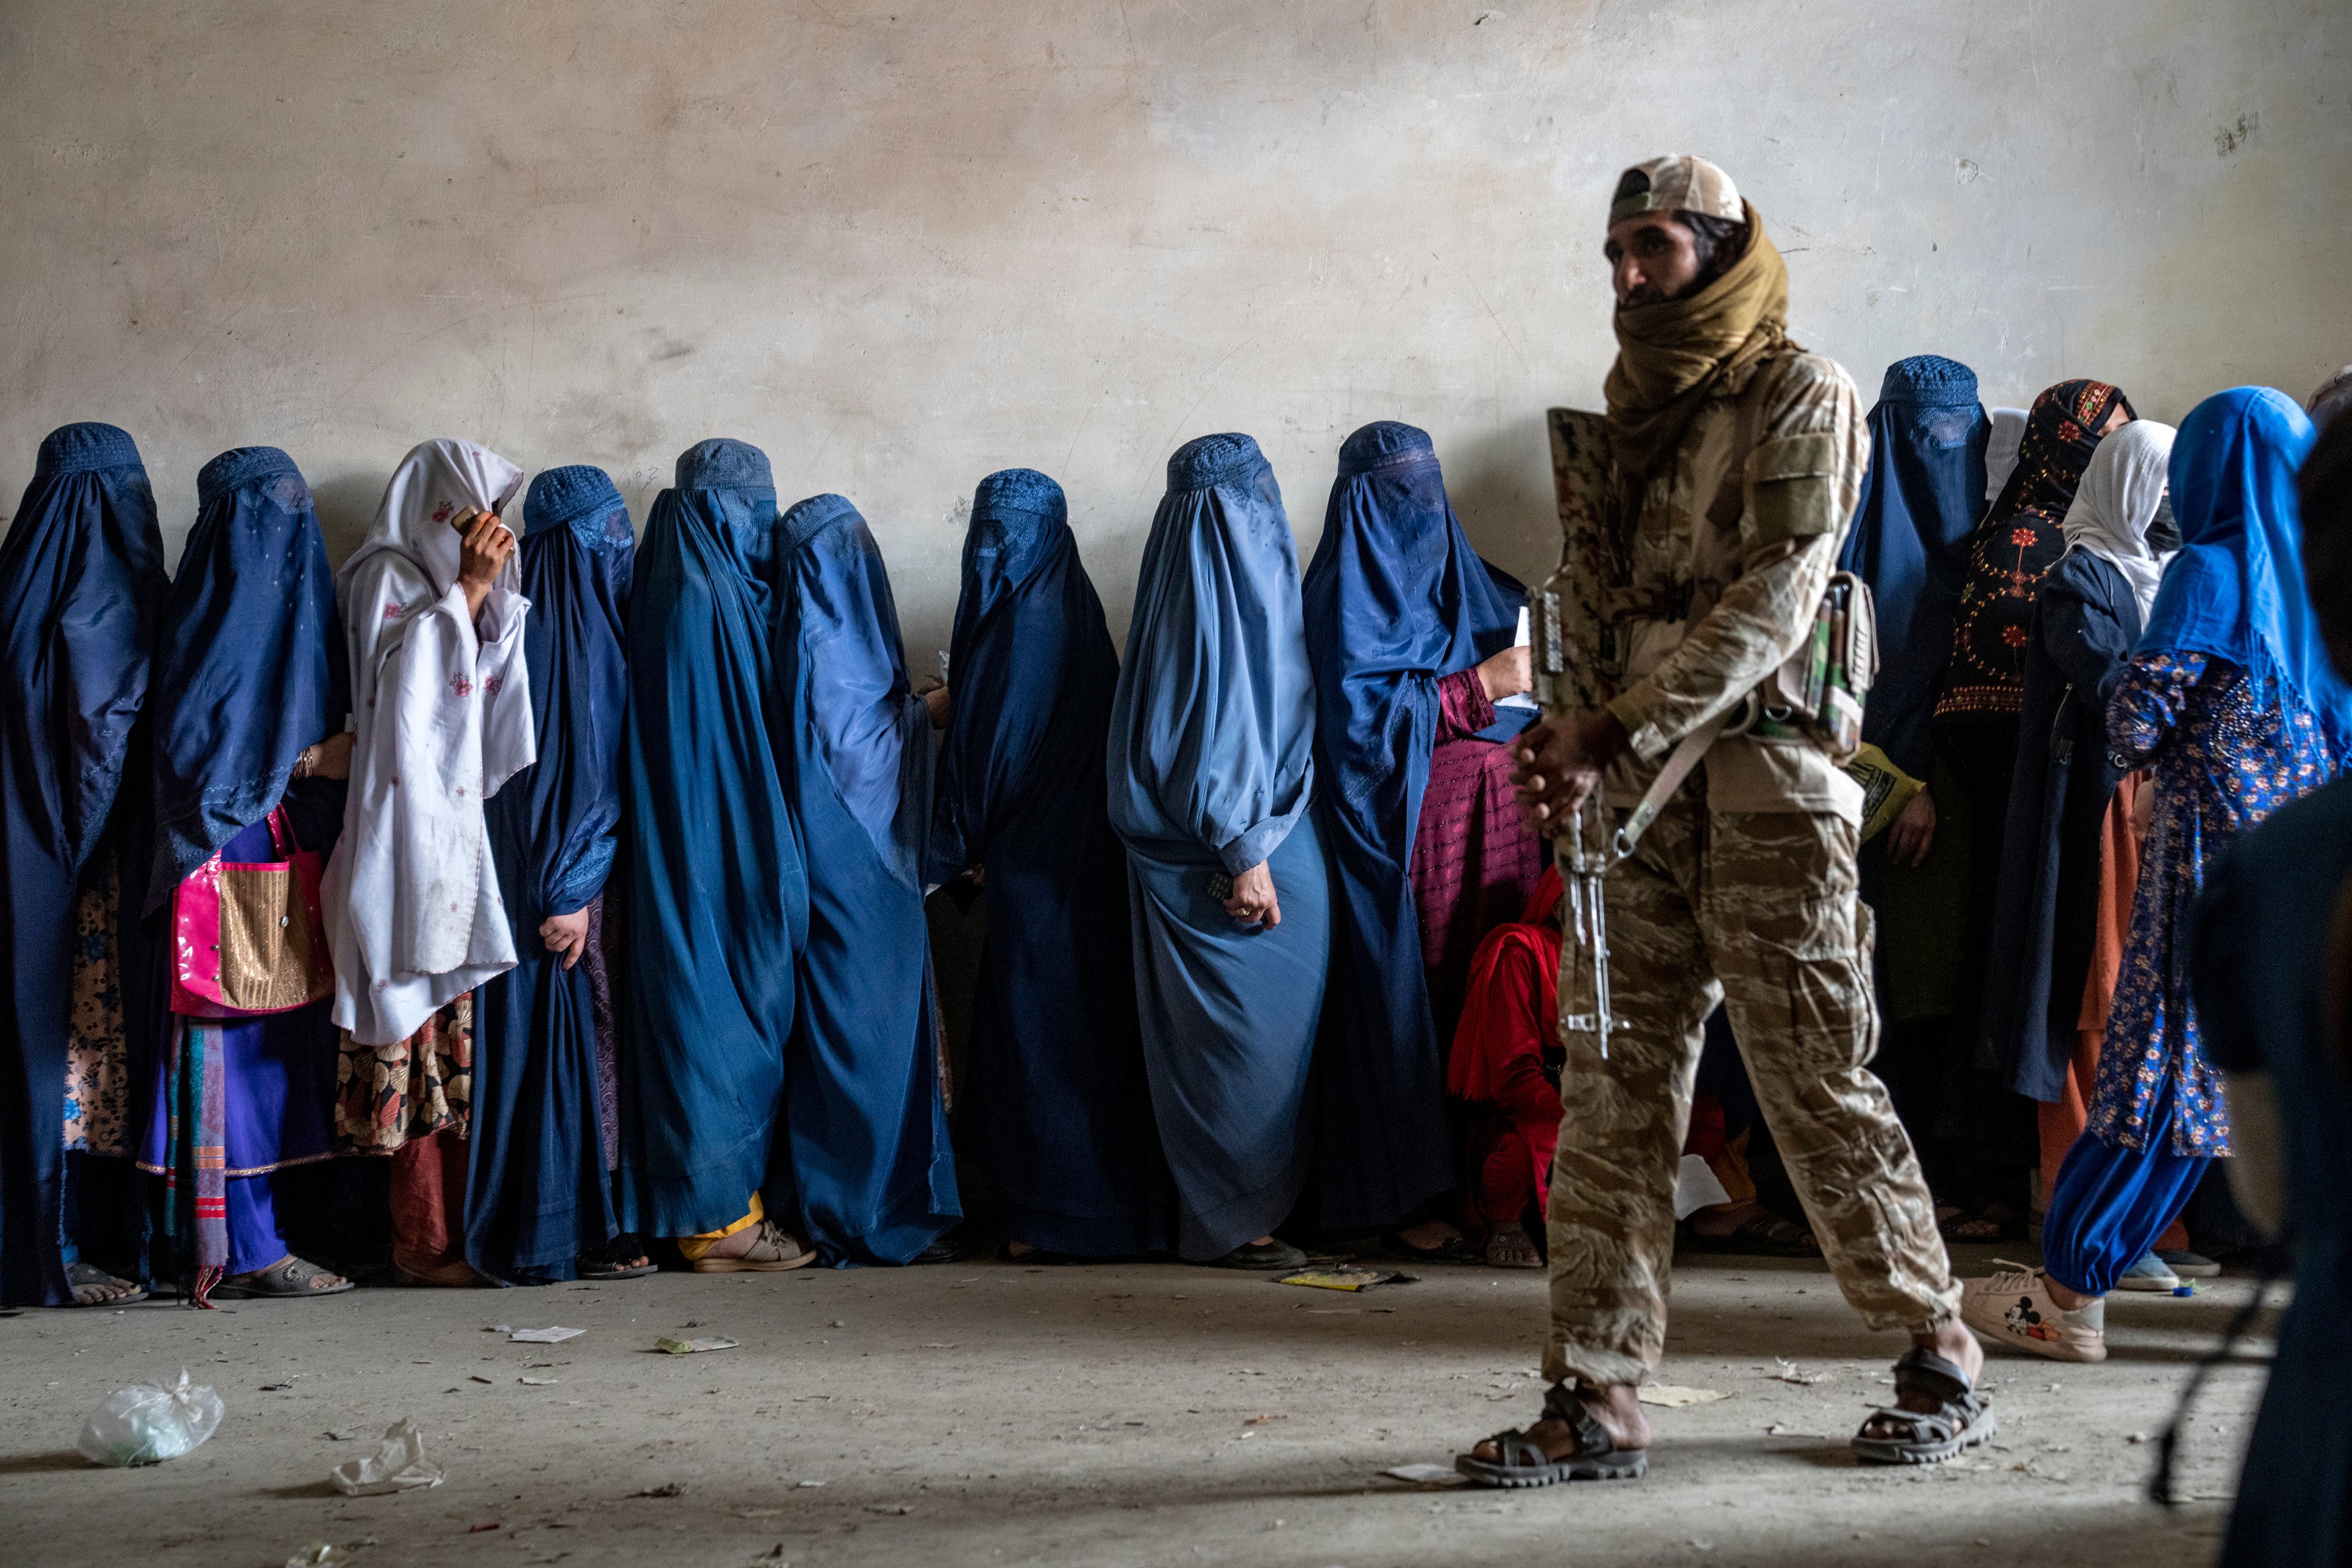 A Taliban fighter stands guard as women wait to receive food from a humanitarian aid group in Kabul on May 23. Photo: AP